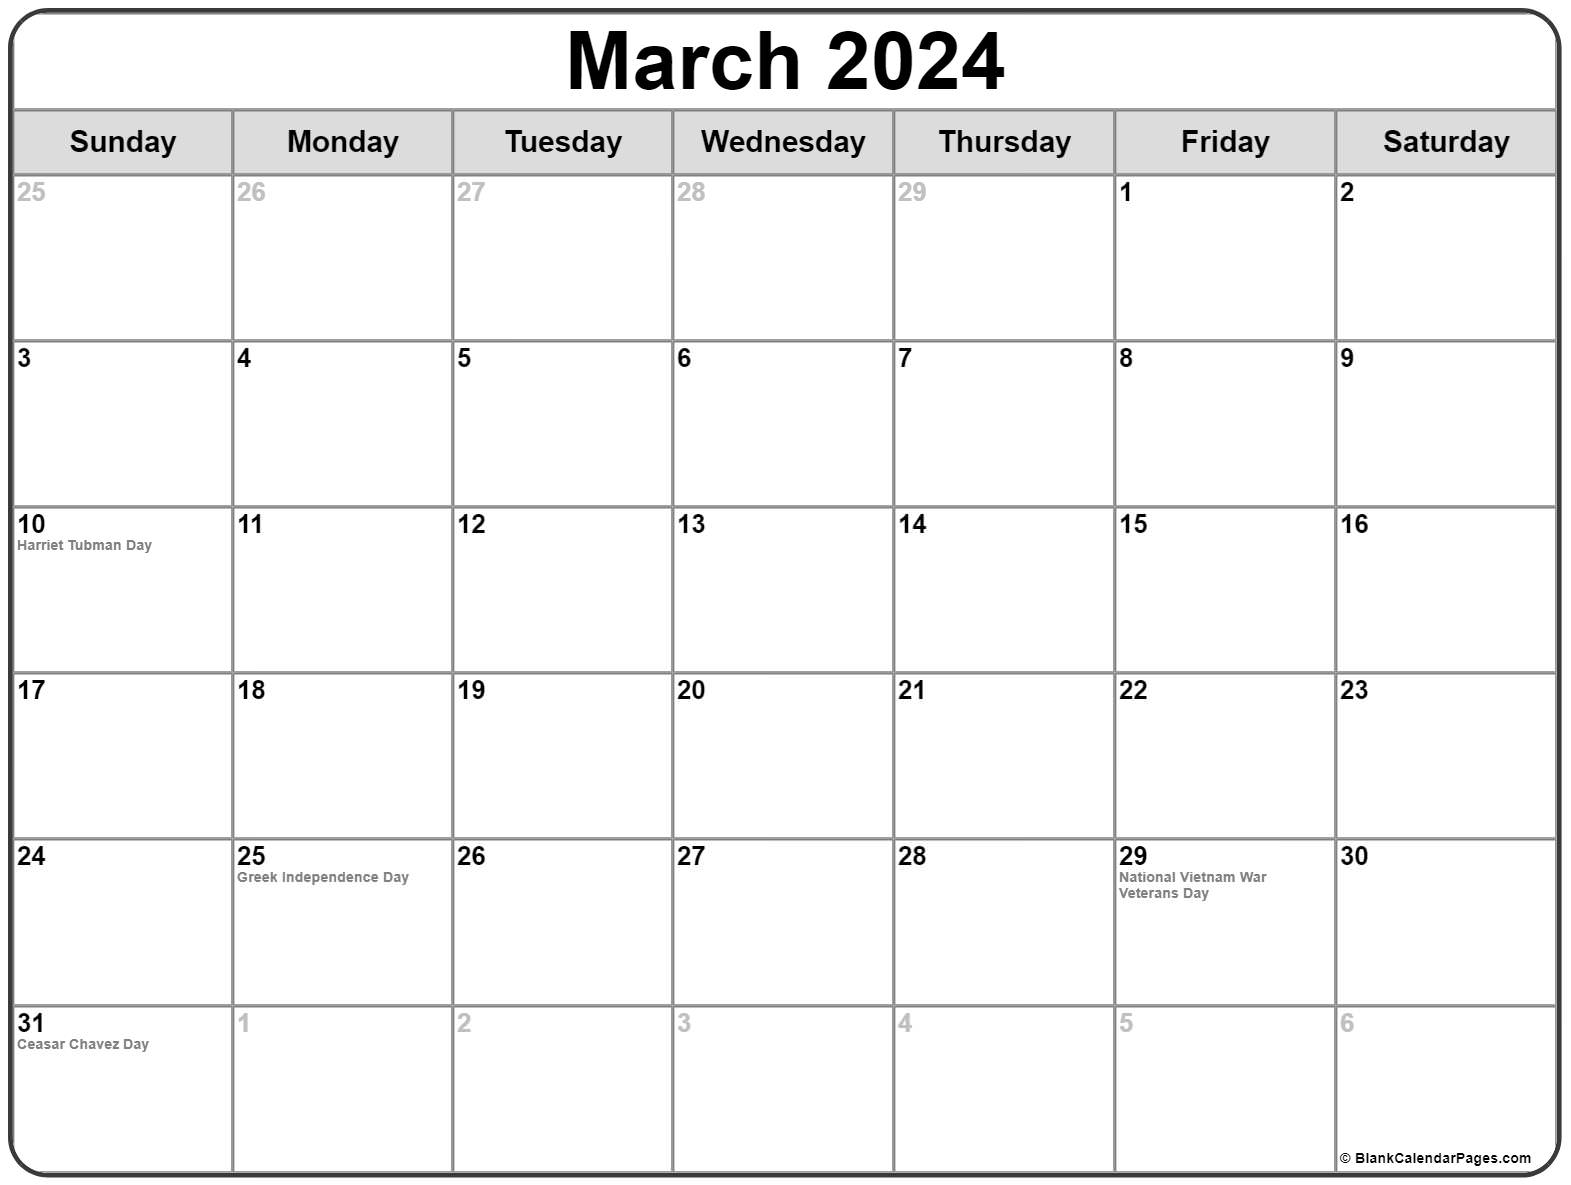 March holiday 2022